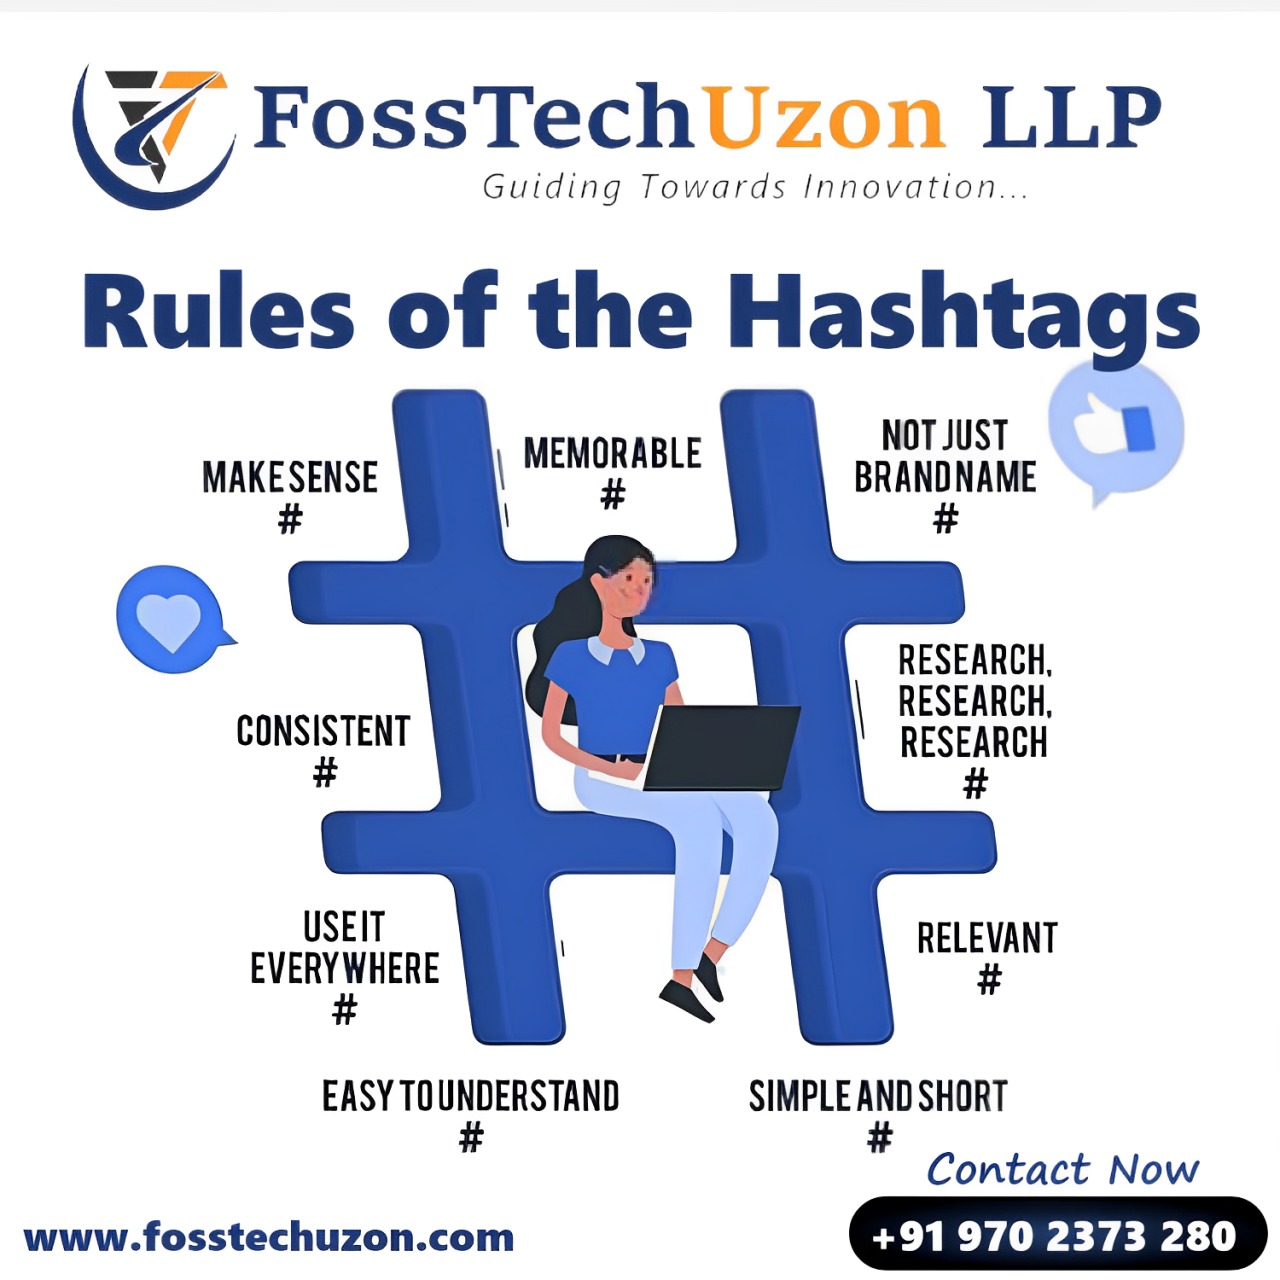 Empower your business with Foss Tech Uzon